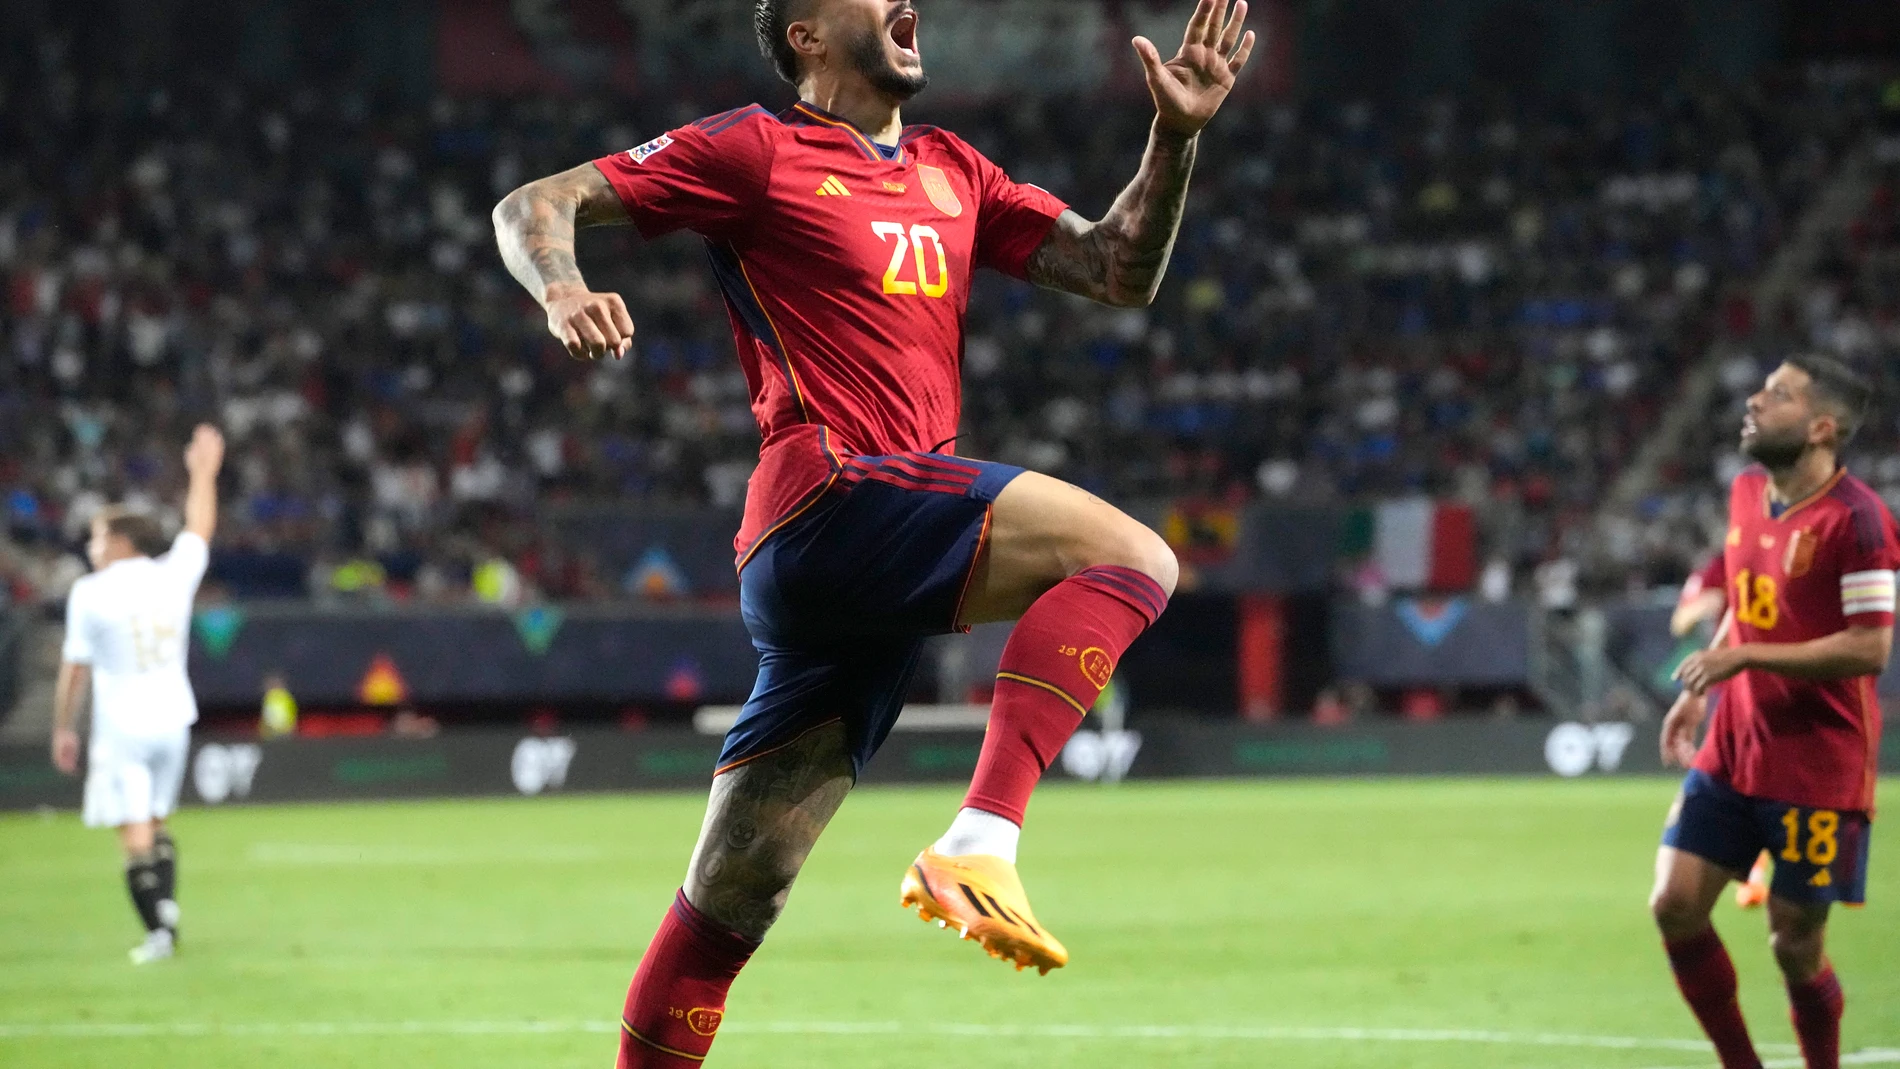 Spain's Joselu celebrates after scoring his side's second goal during the Nations League semifinal soccer match between the Spain and Italy at De Grolsch Veste stadium in Enschede, eastern Netherlands, Thursday, June 15, 2023. (AP Photo/Martin Meissner)